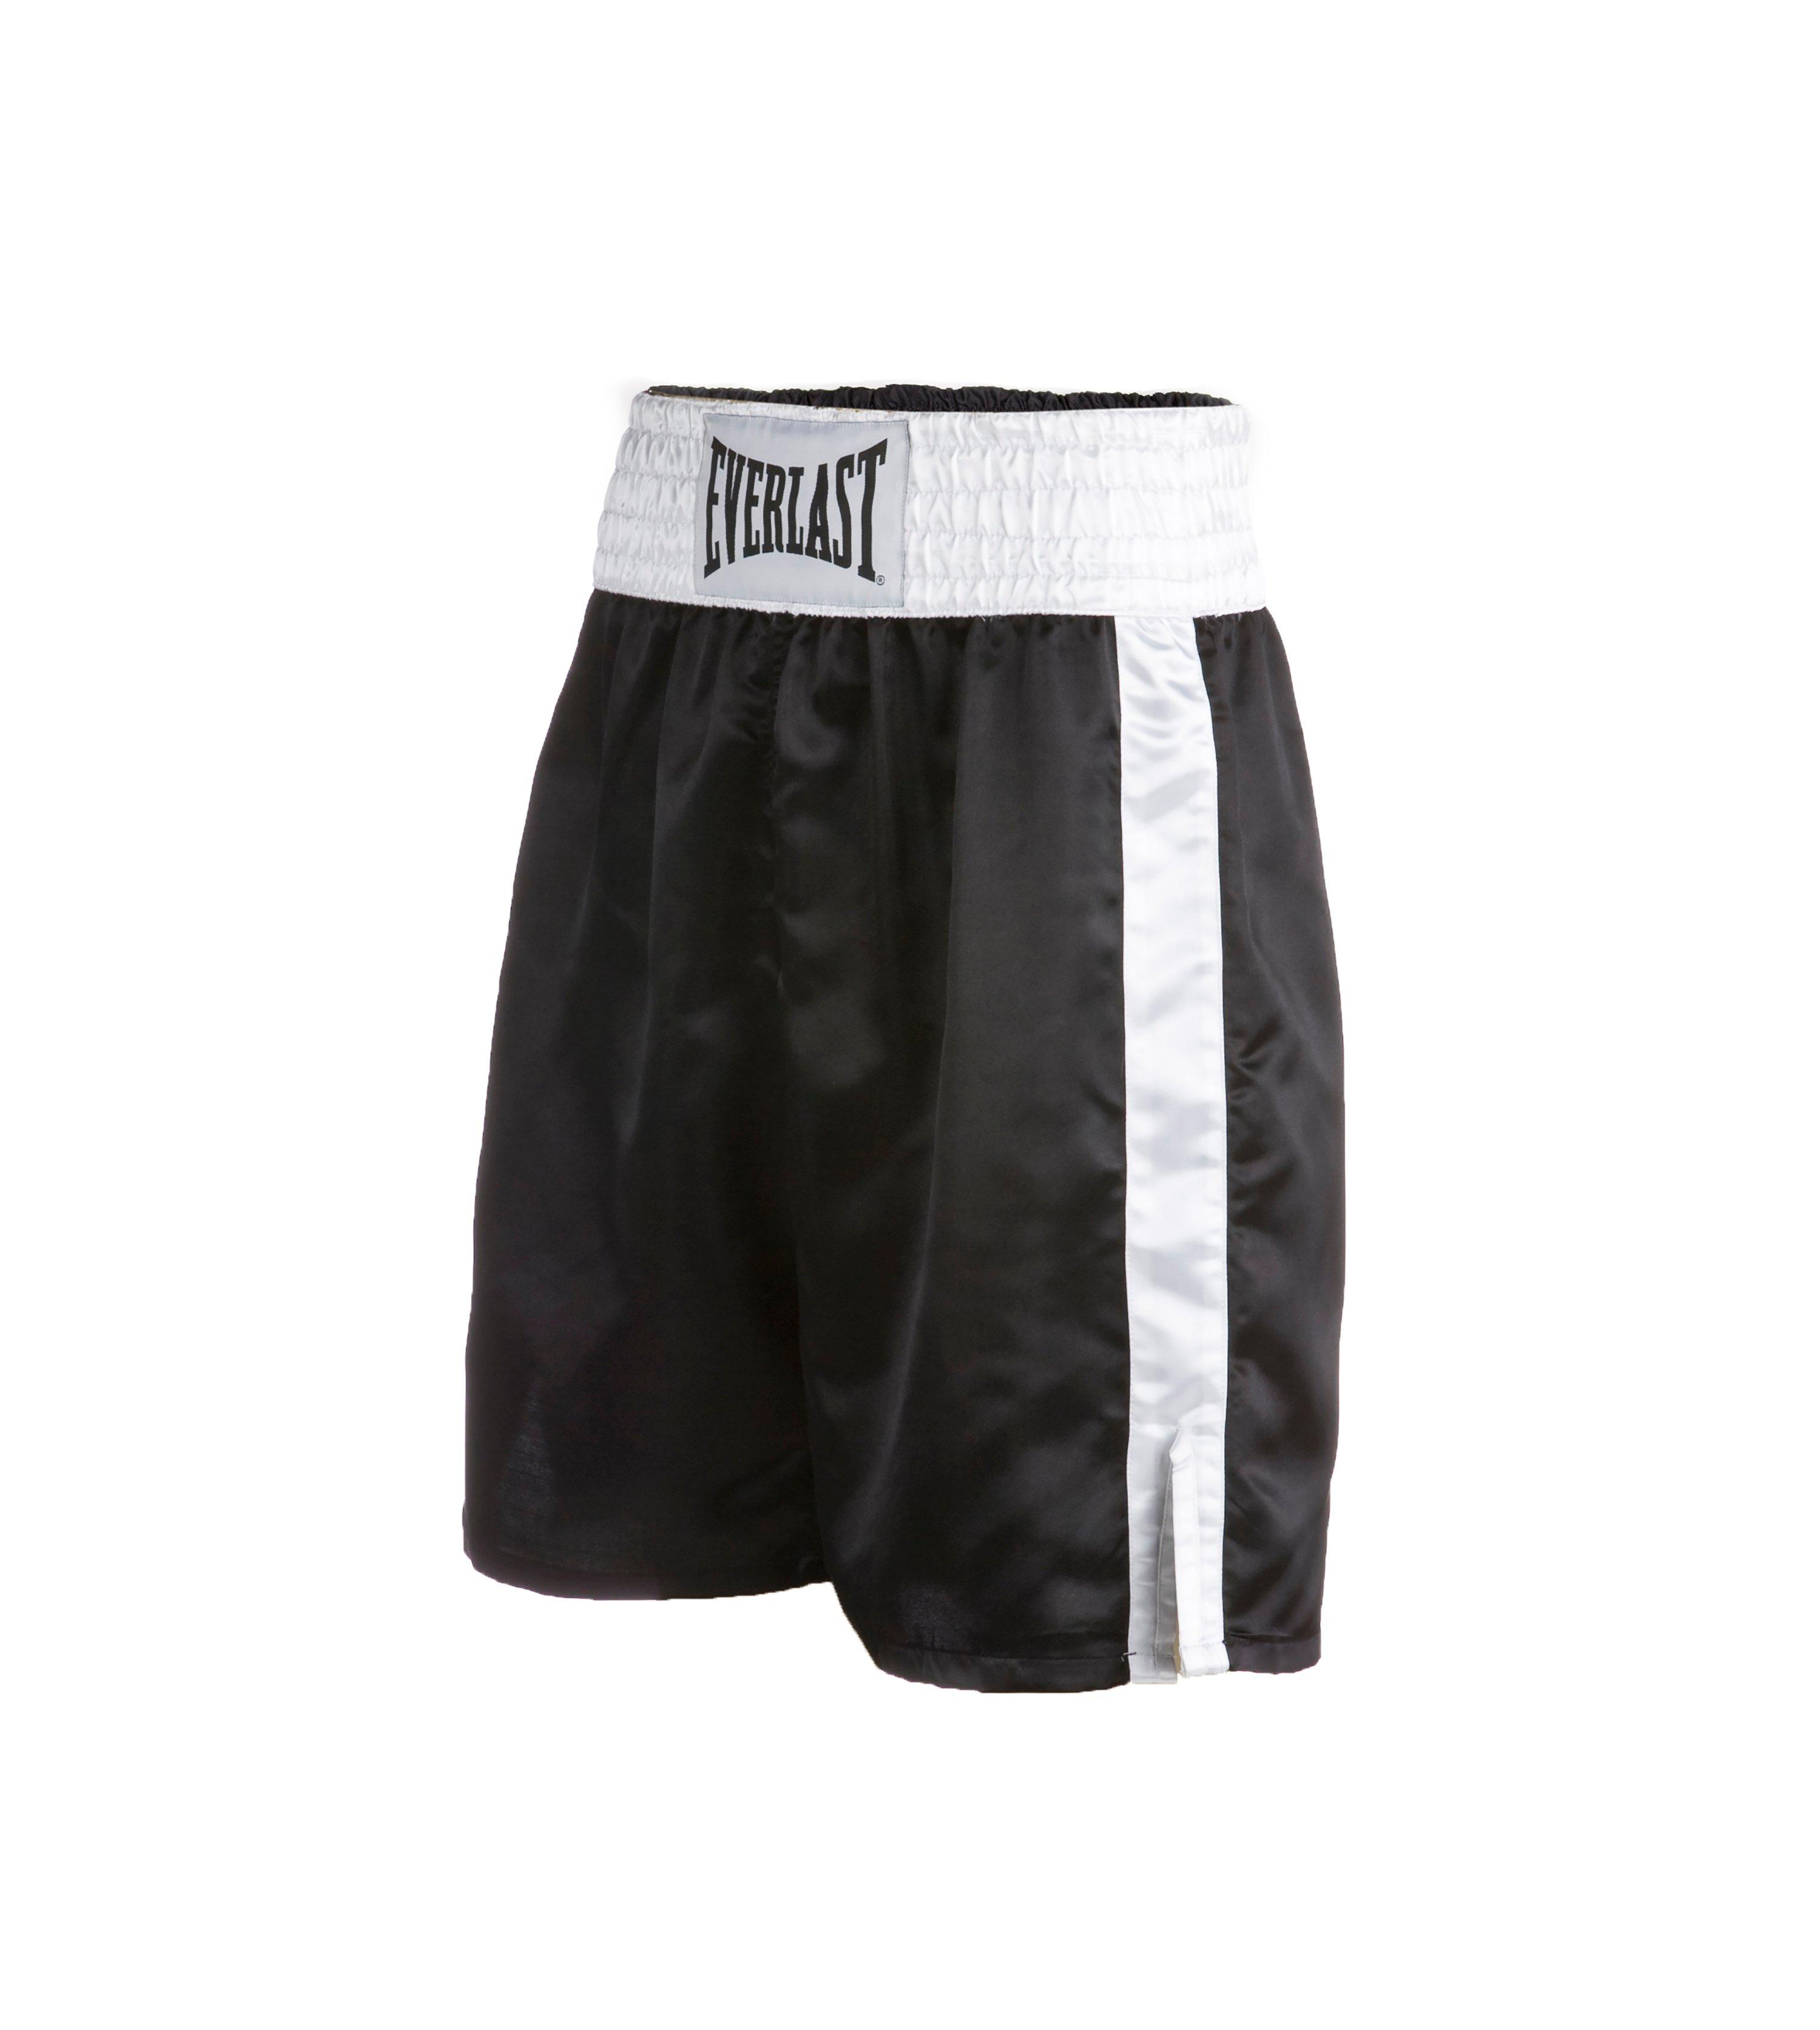 nike boxing trunks for sale